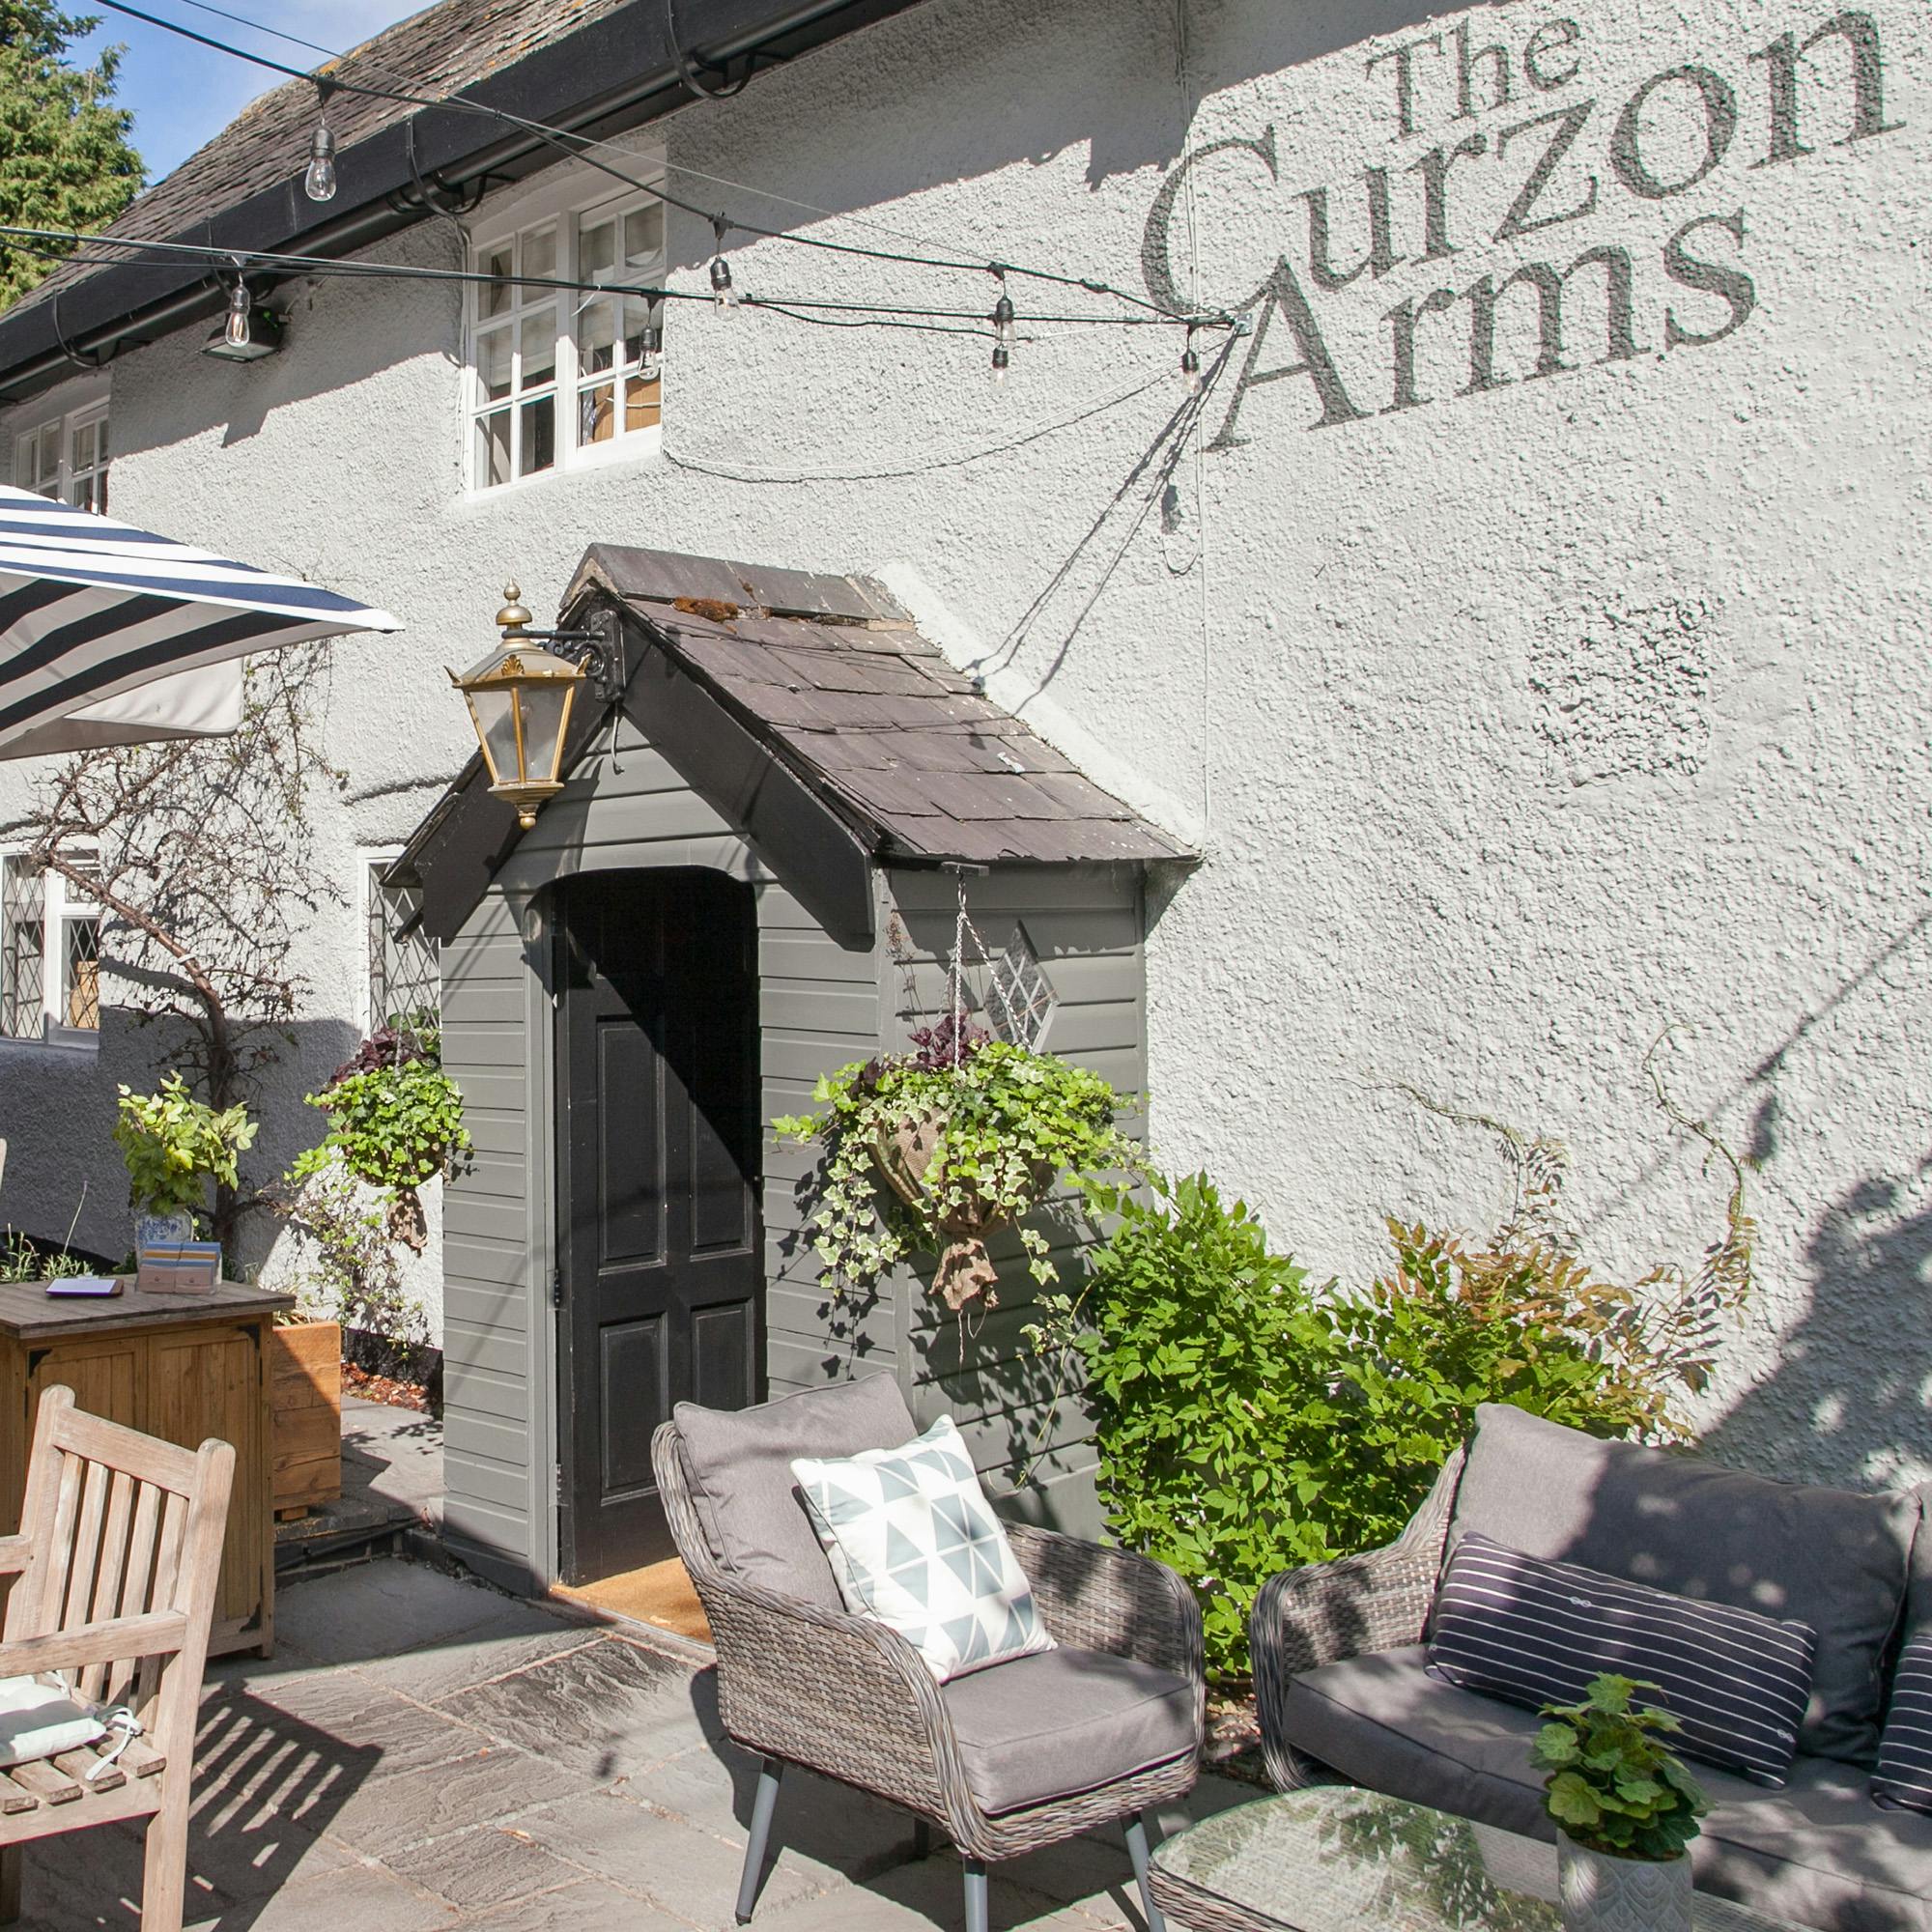 The Curzon Arms